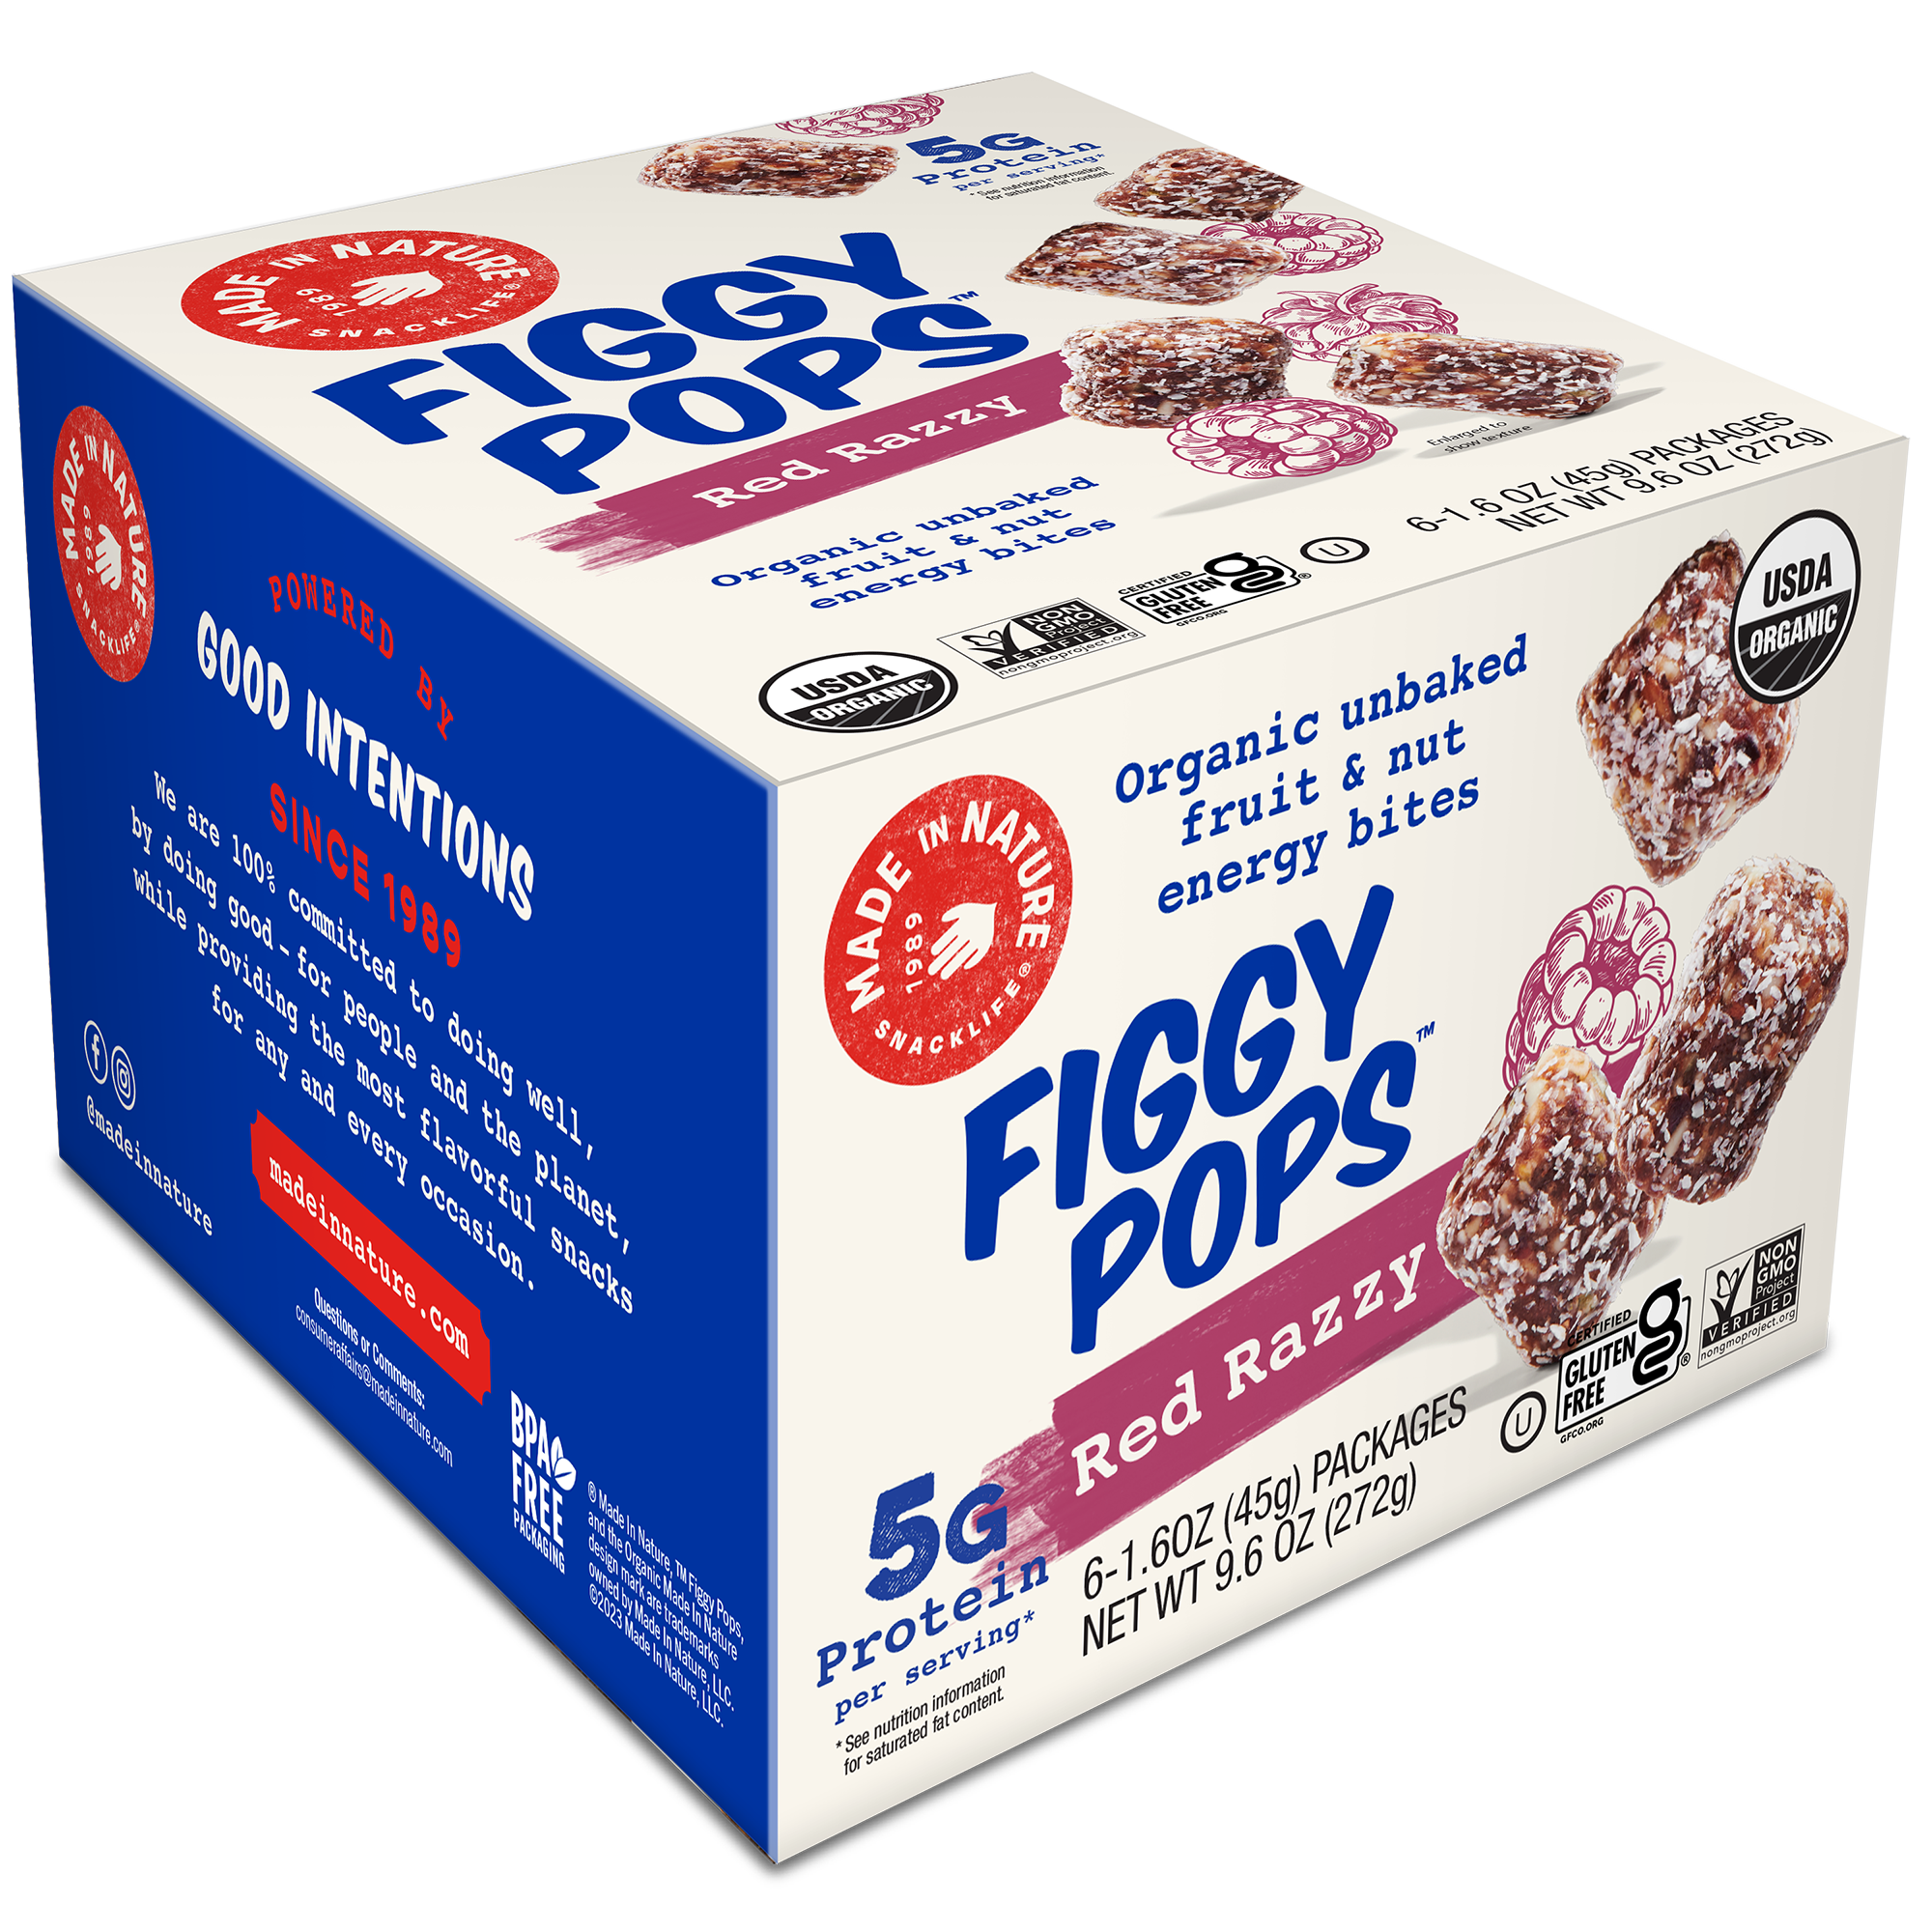 Red Razzy Figgy Pops (6 pack)